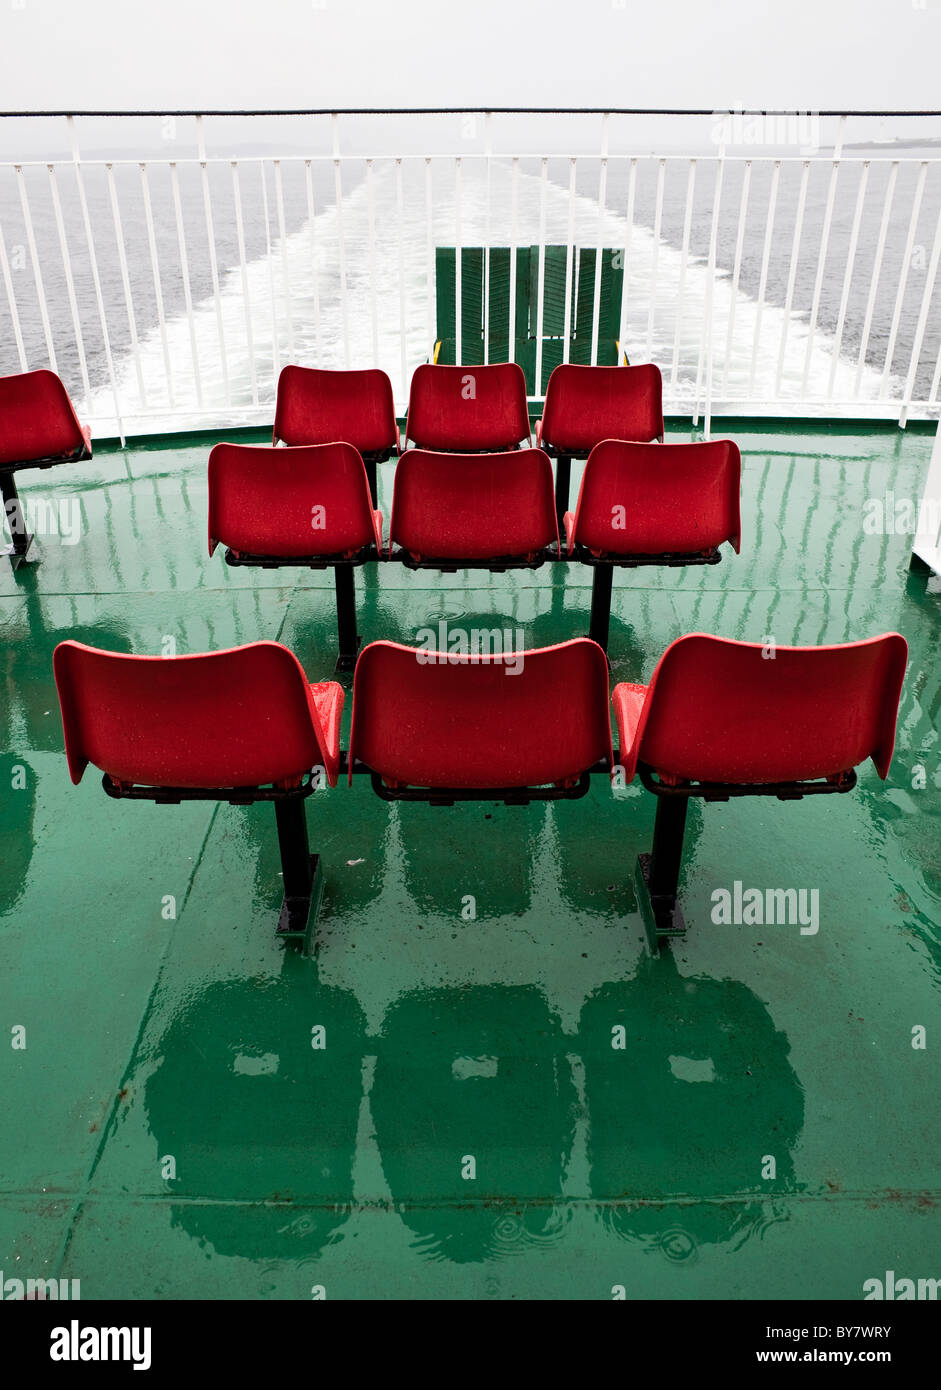 Outer deck seating of the Caledonian MacBrayne ferry from Lochboisdale to Oban on a rainy day, Scotland Western Isles Stock Photo